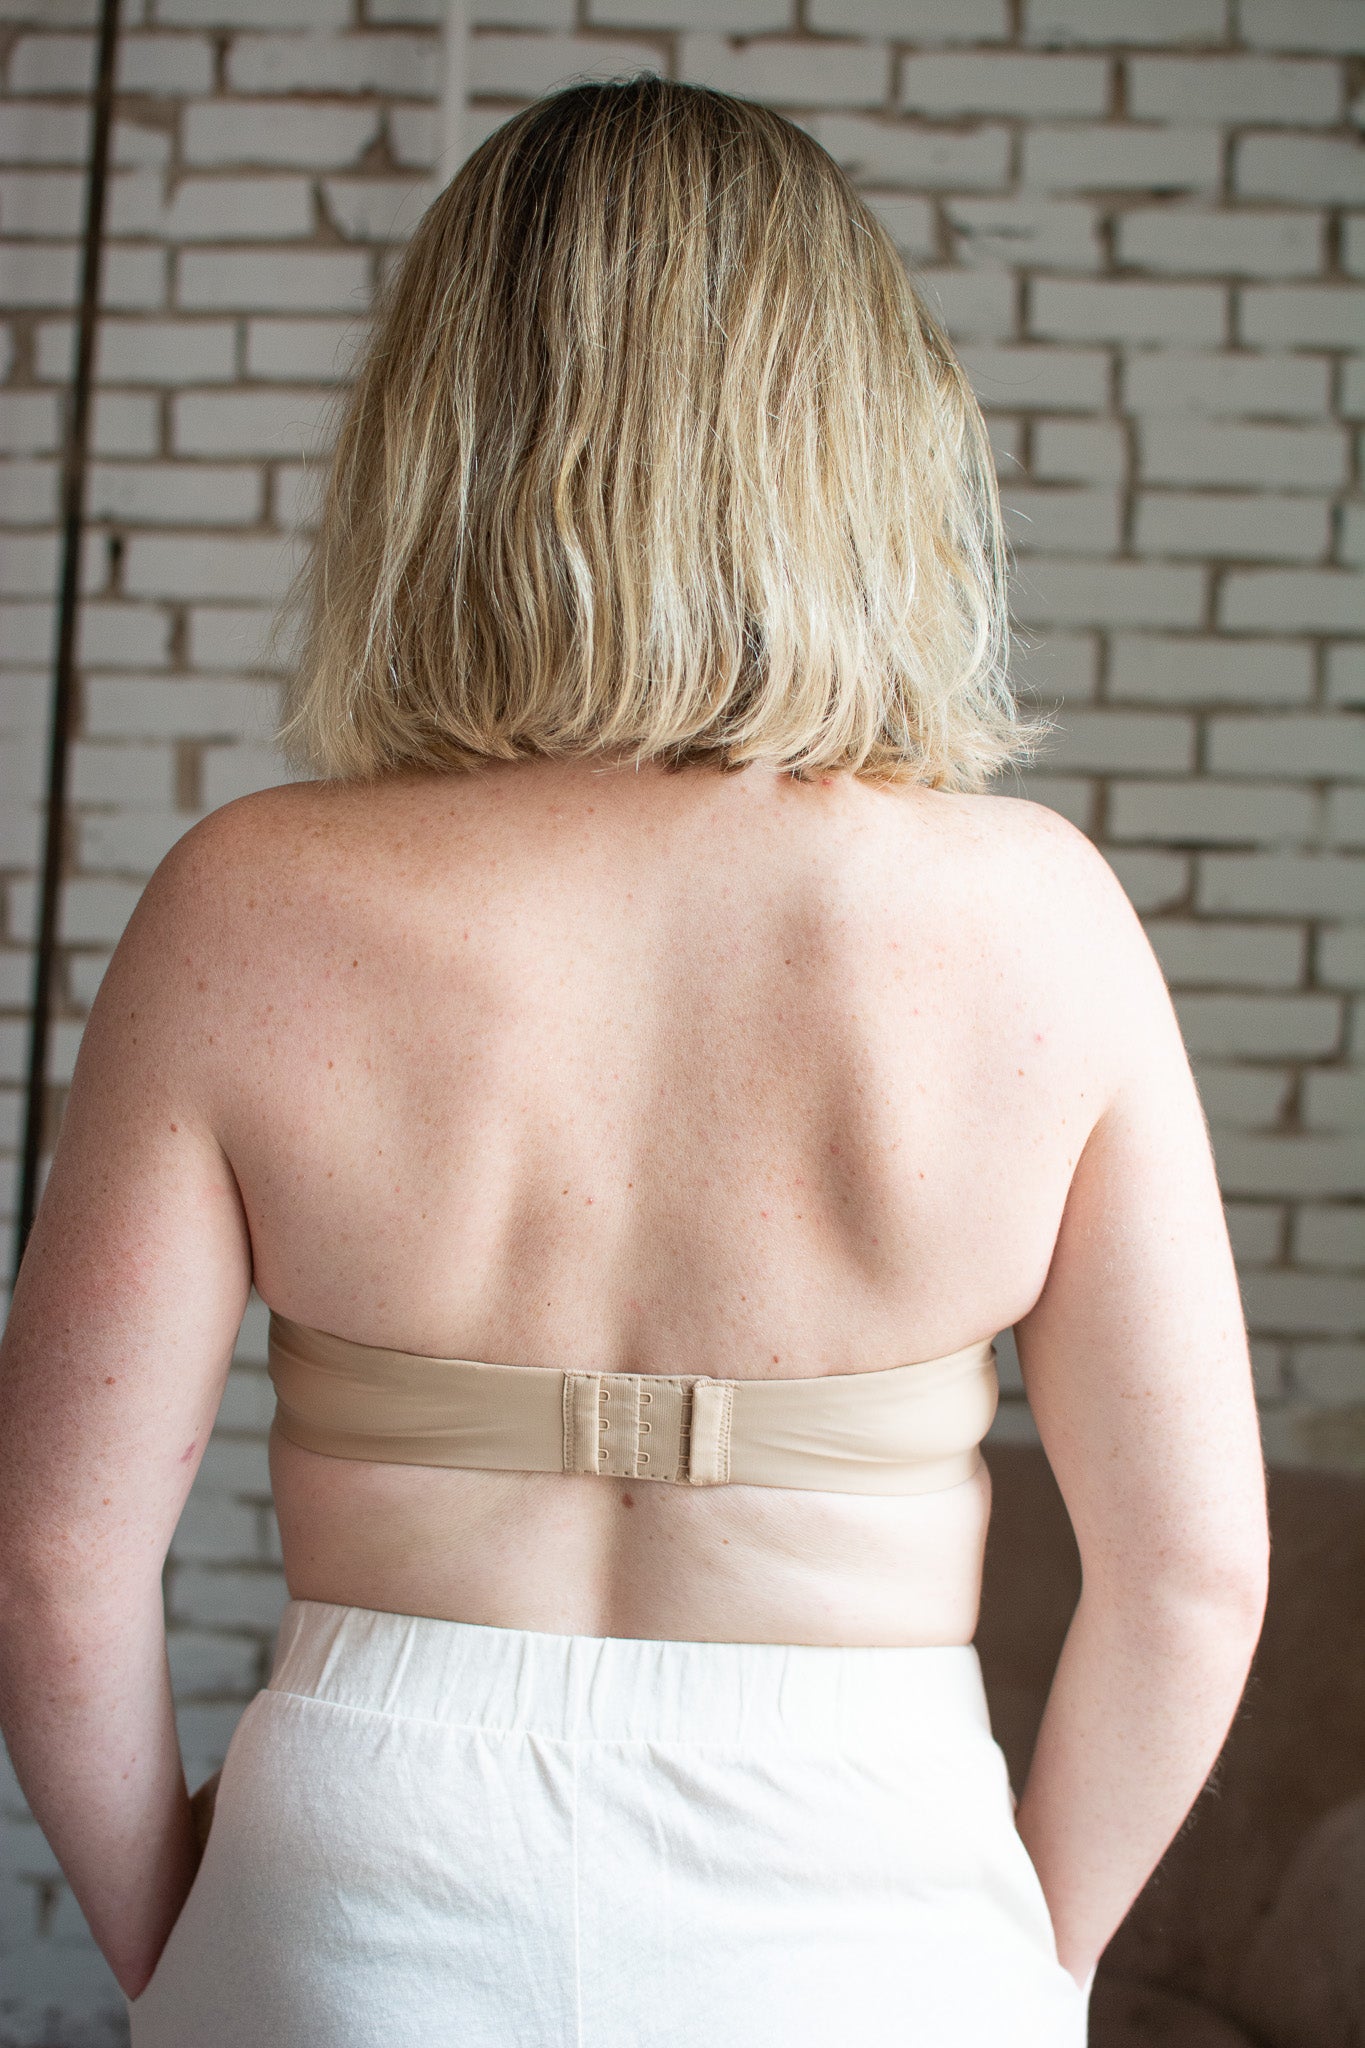 Strapless Clear Back Bra: The Ultimate Solution to Backless